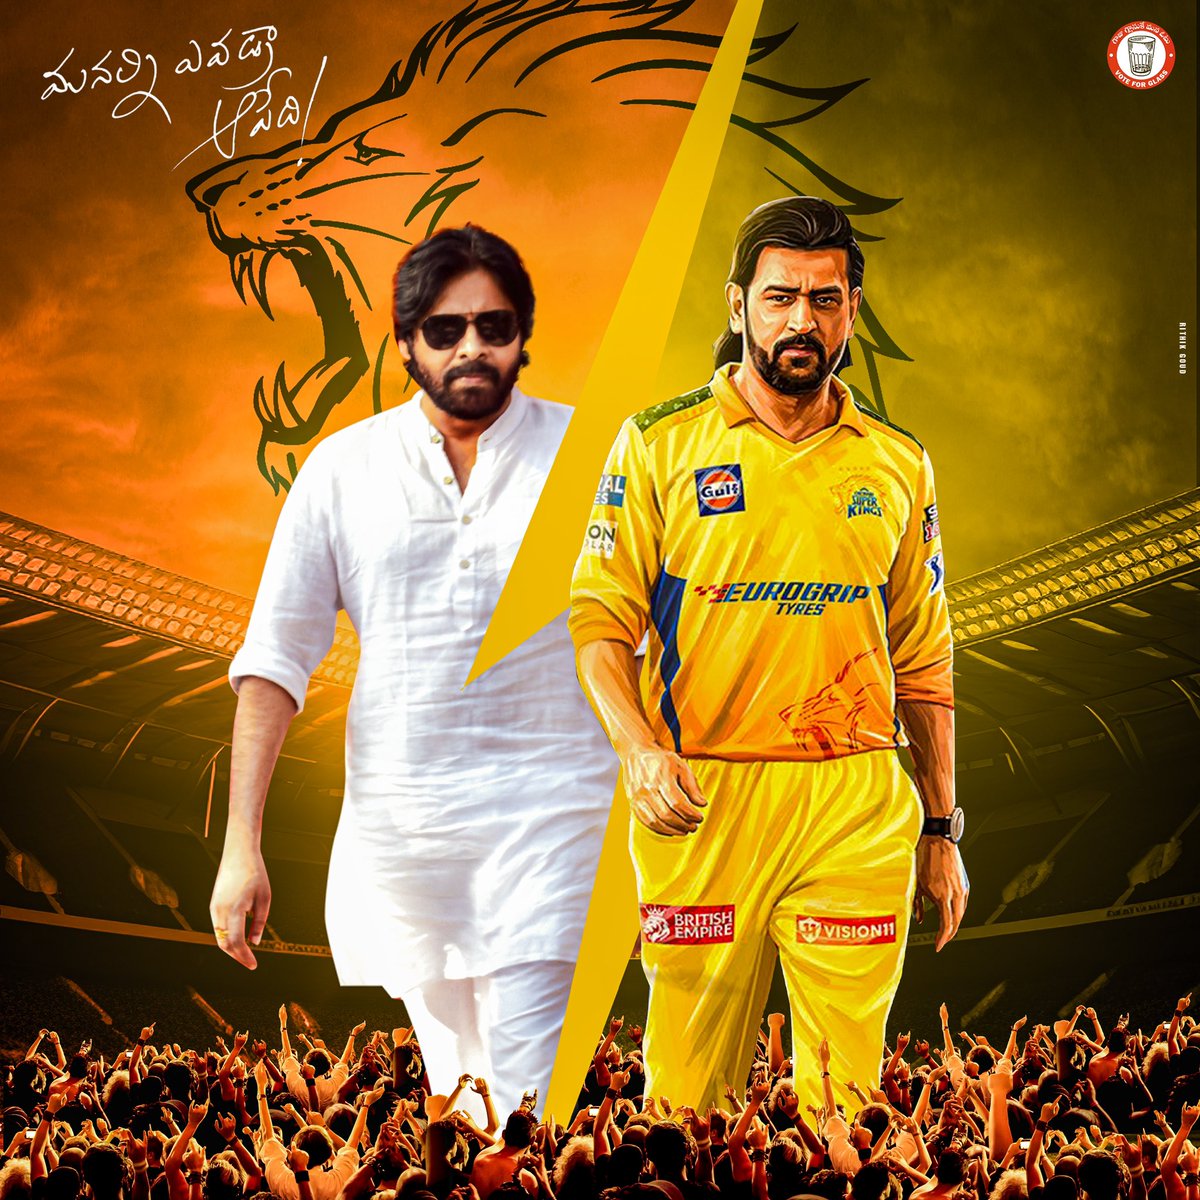 The men who have held my admiration and continue to inspire me every day with their achievements & vision. Delighted to unveil this CDP as both are set to embark on new chapters in their respective fields very soon 🤗🤗 Can't wait for the madness to begin! @PawanKalyan @msdhoni